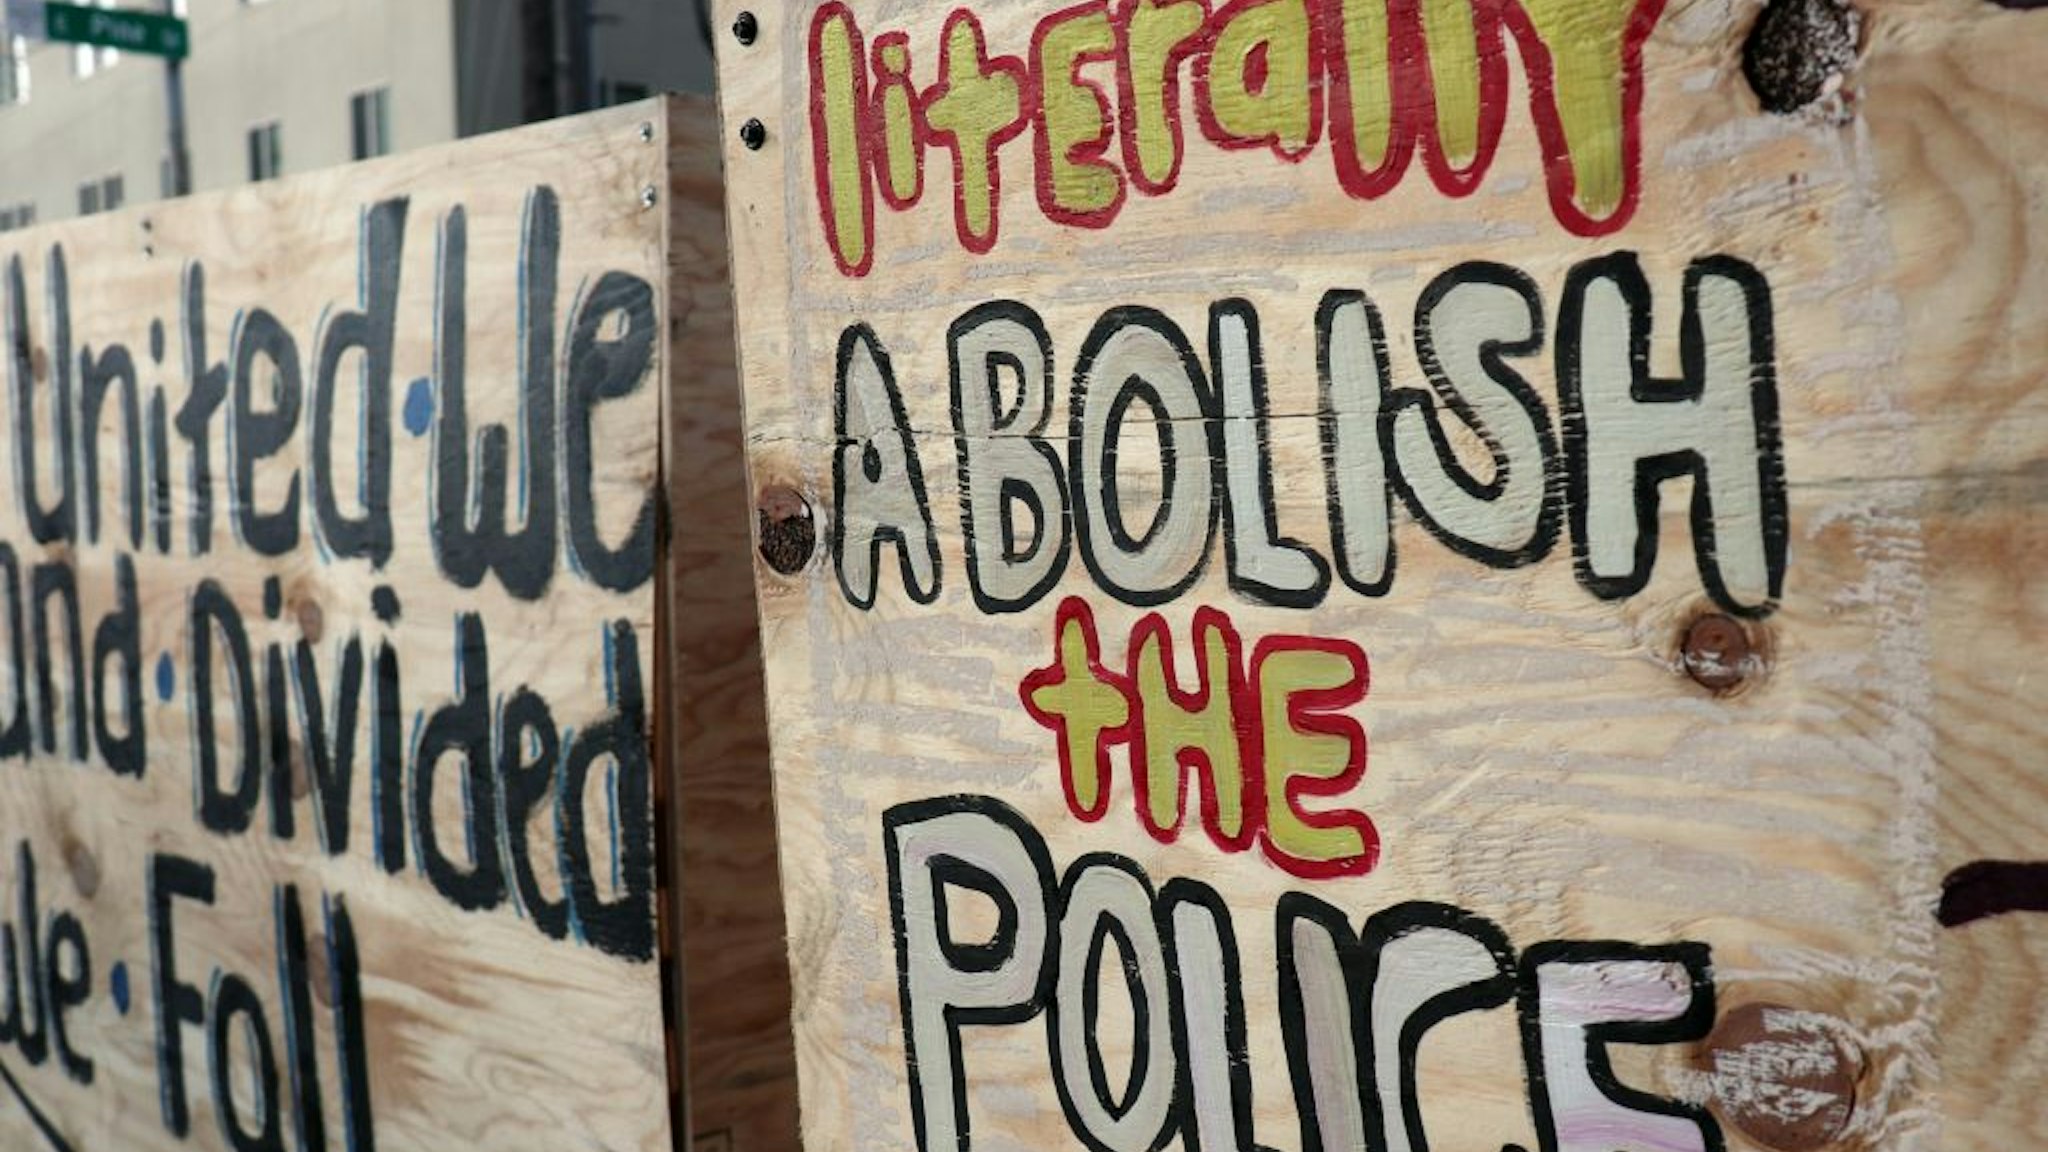 Graffiti on a barricade inside the so-called "Capitol Hill Autonomous Zone" call for the abolition of police.